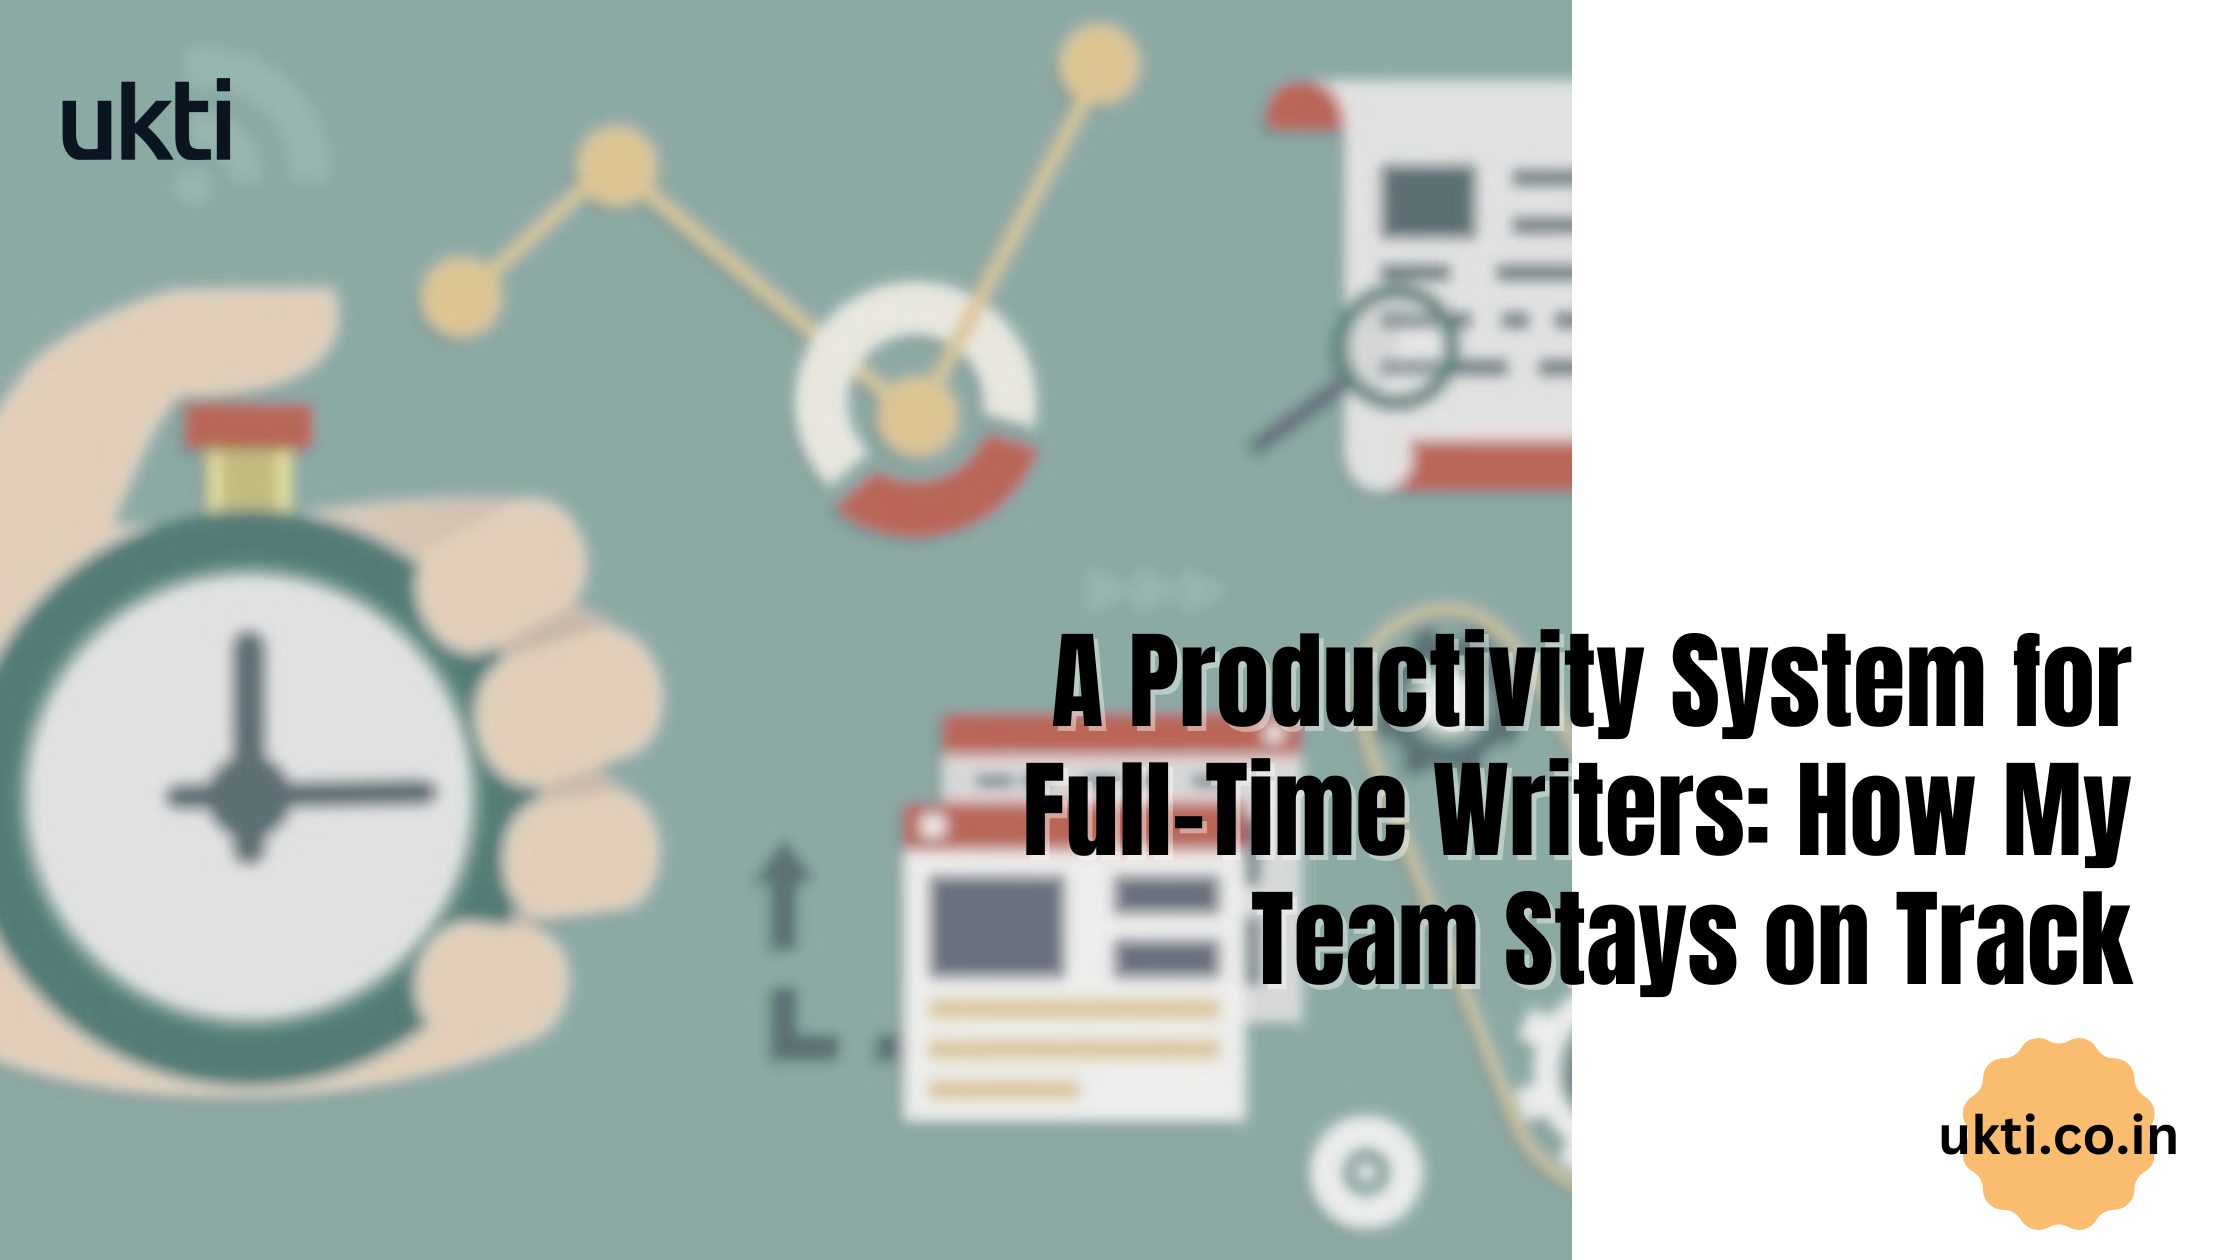 How to Become a More Productive Writer?